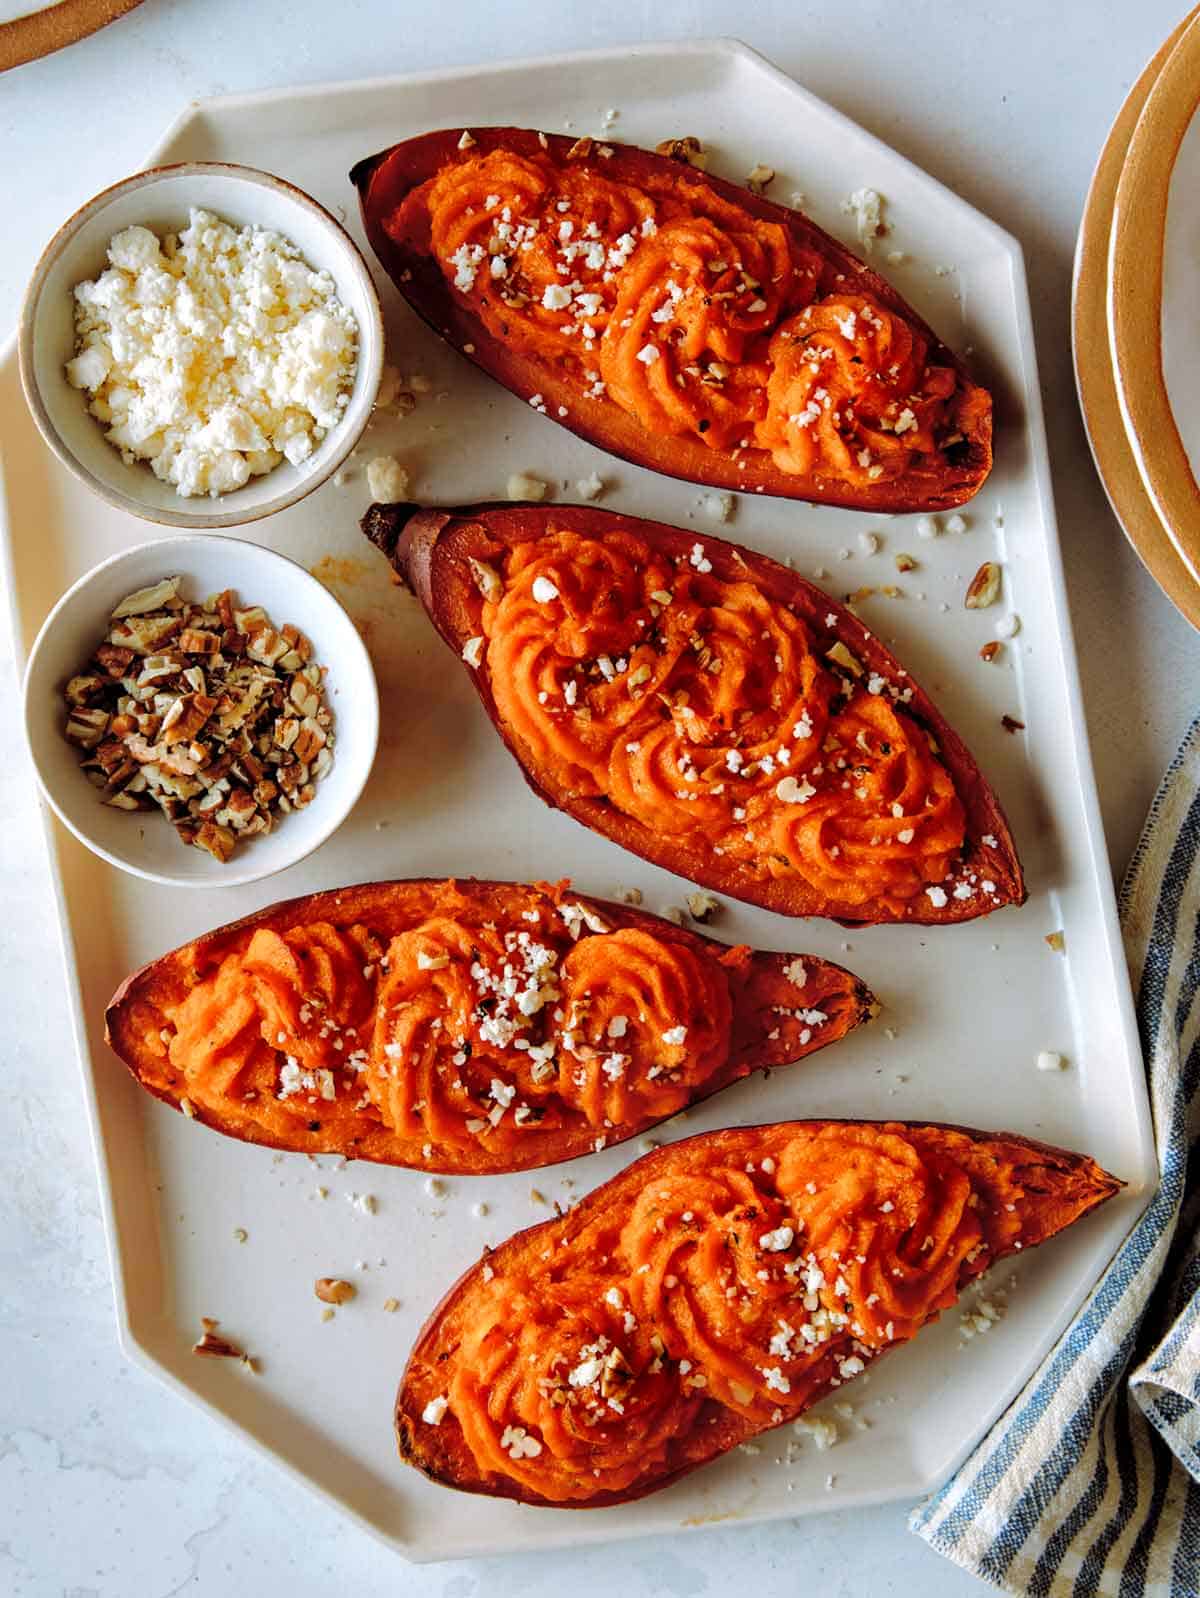 Twice baked sweet potatoes prepared and put on a platter.